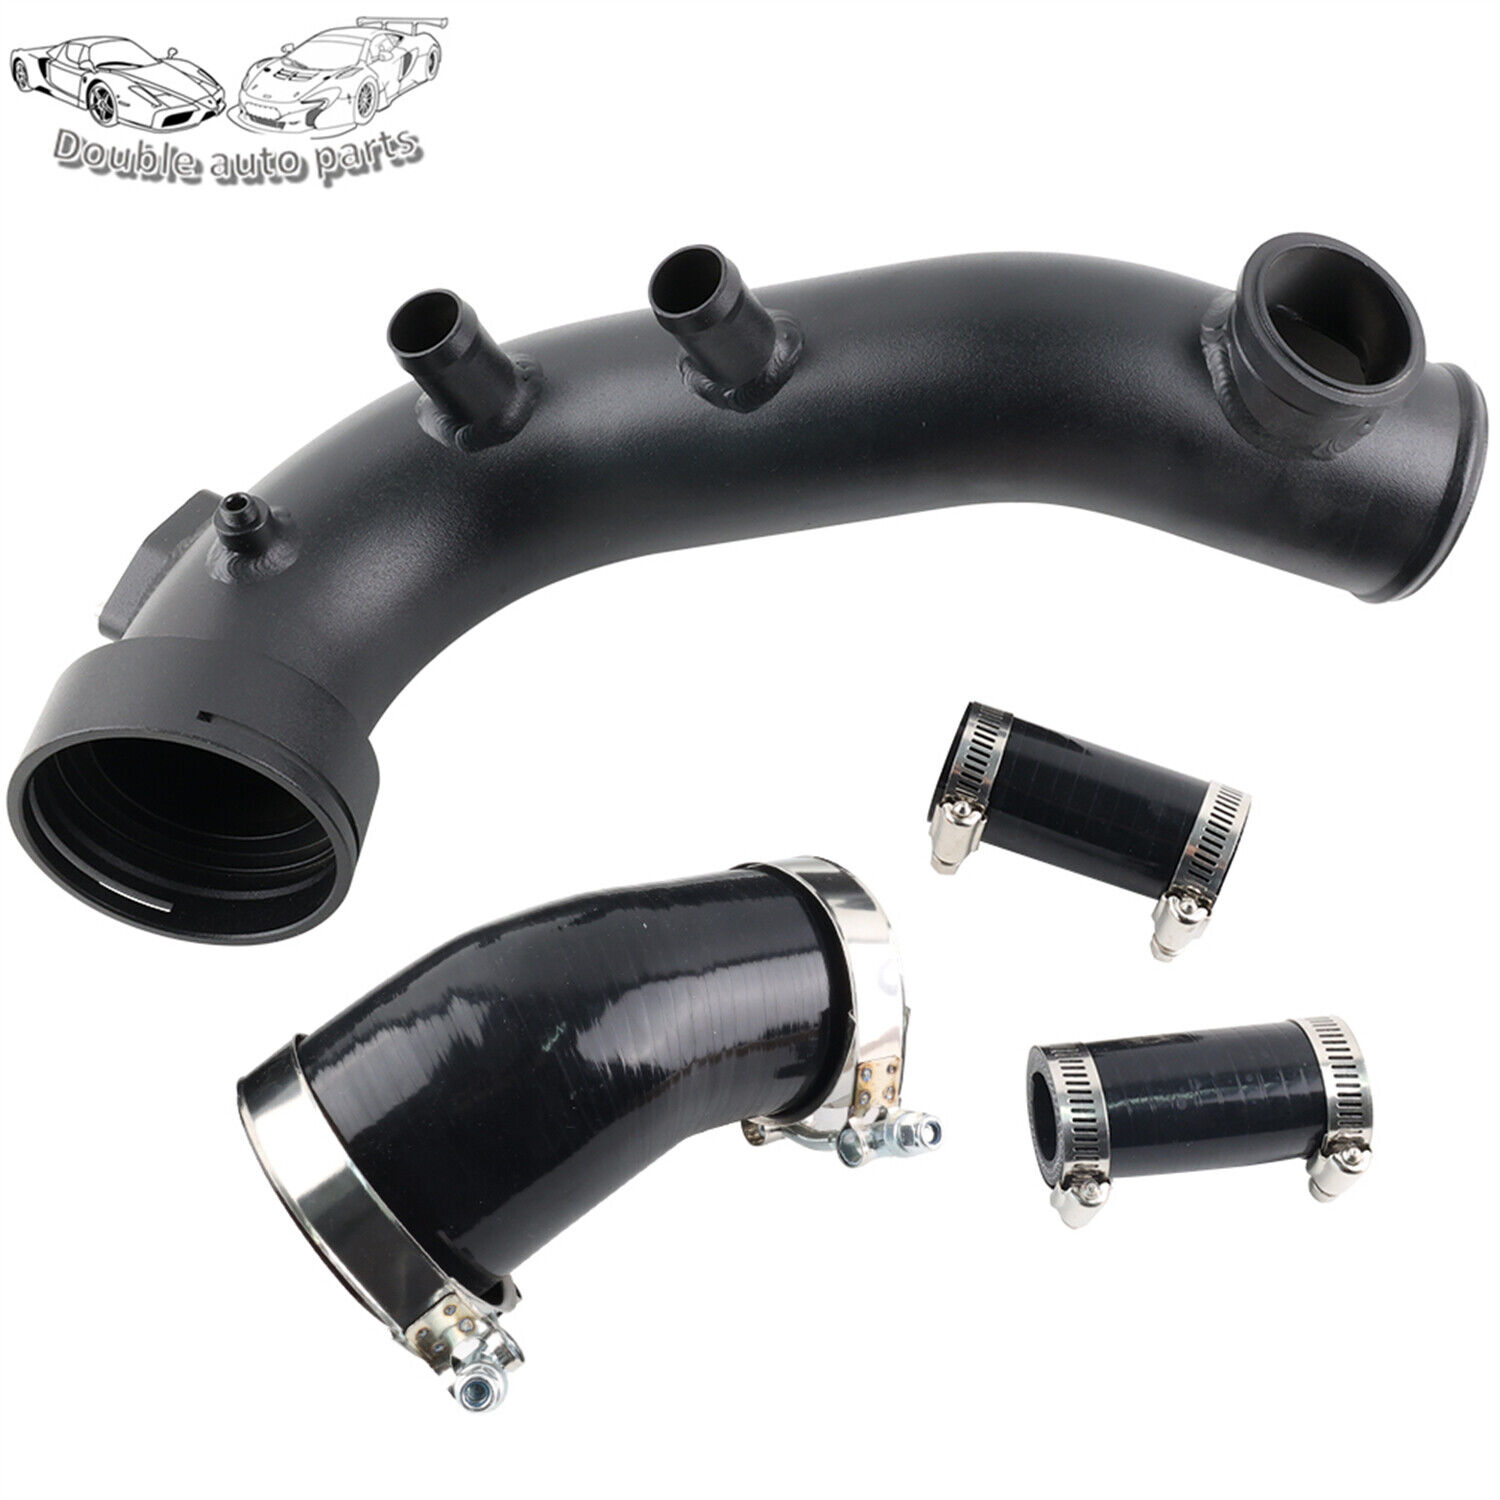 For BMW E82 E88 E90 E91 E92 E93 135i 335i 335xi Black Intake Turbo Charge Pipe